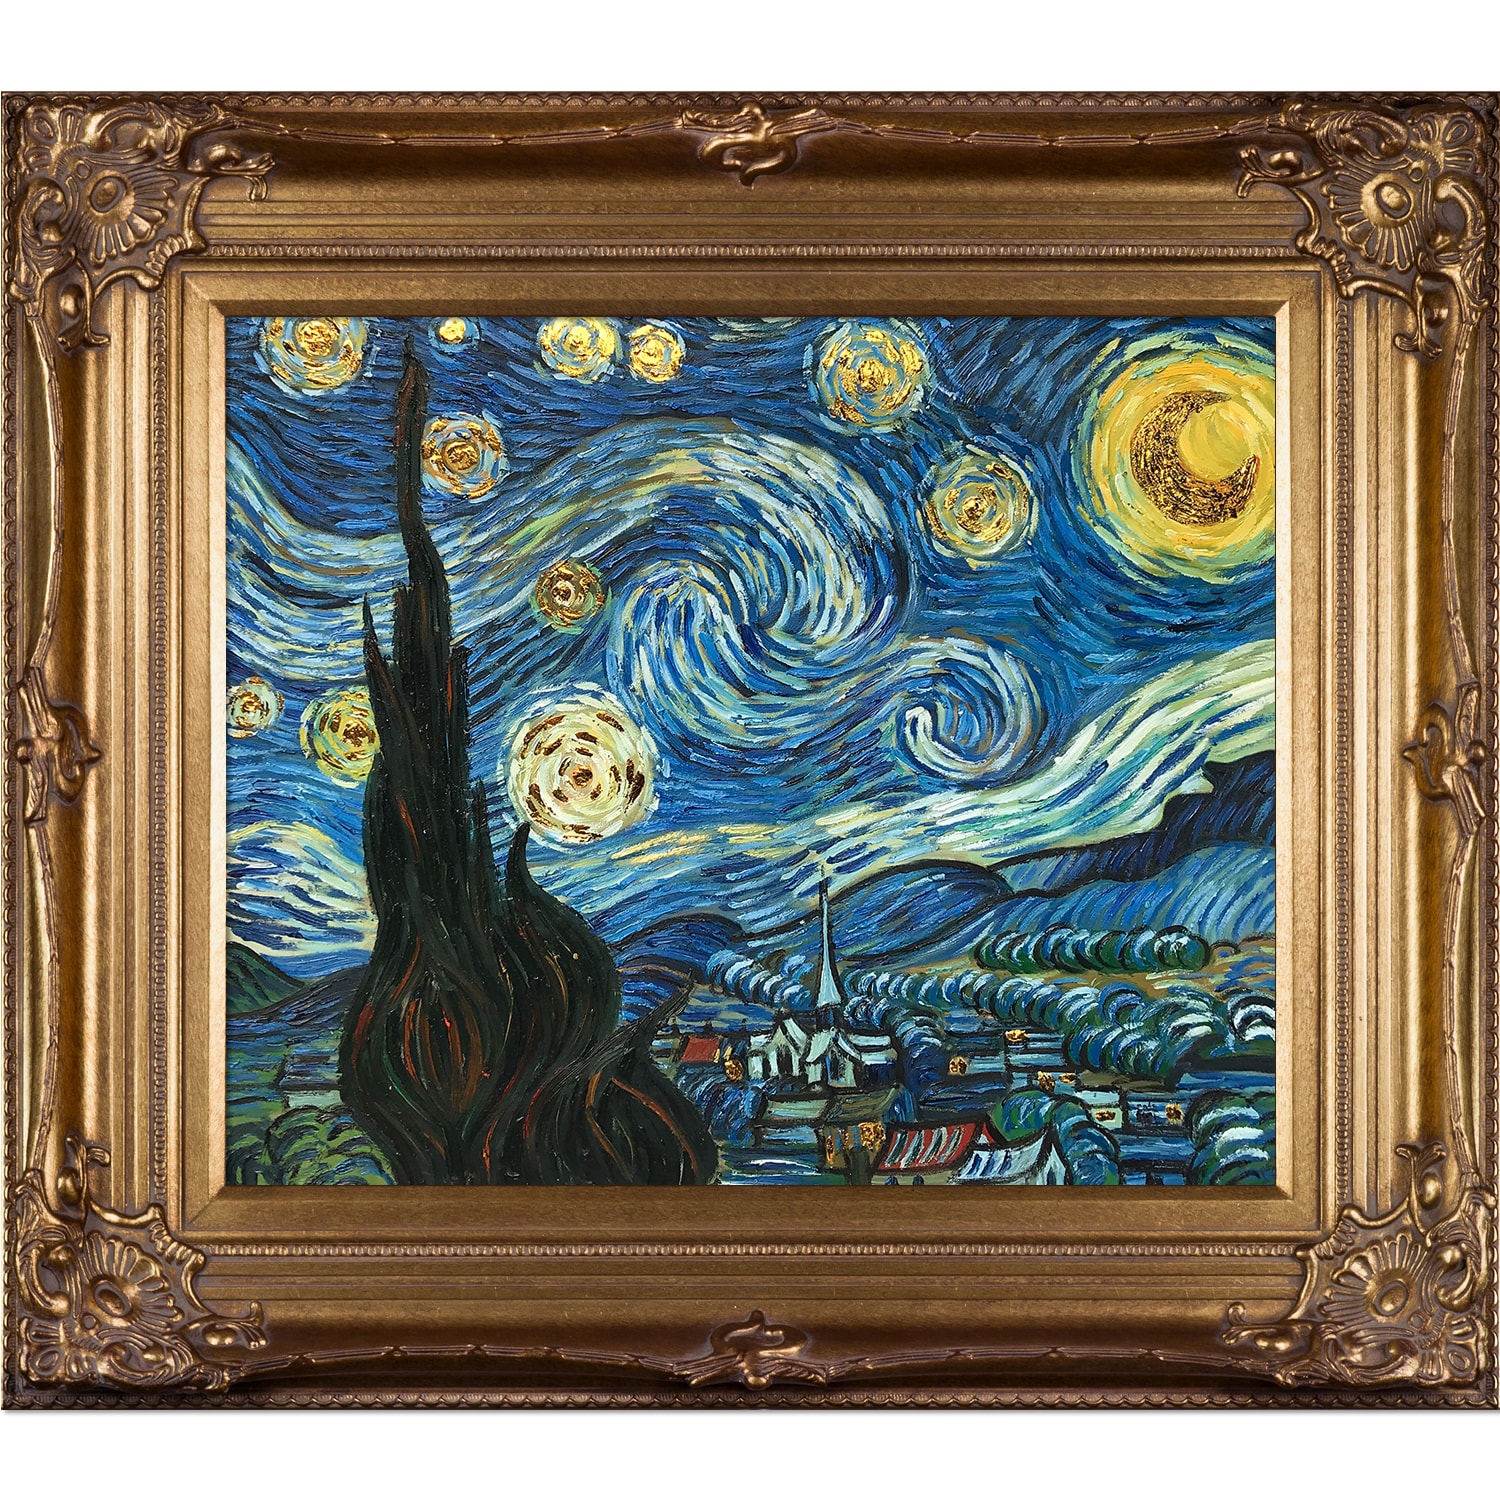 ALAZA Starry Sky Oil Painting Van Gogh Artwork 9.5 Inch Round Wall Clock Battery Operated Non-Ticking Silent Quartz for Home Living Room Office Kitchen Bedroom